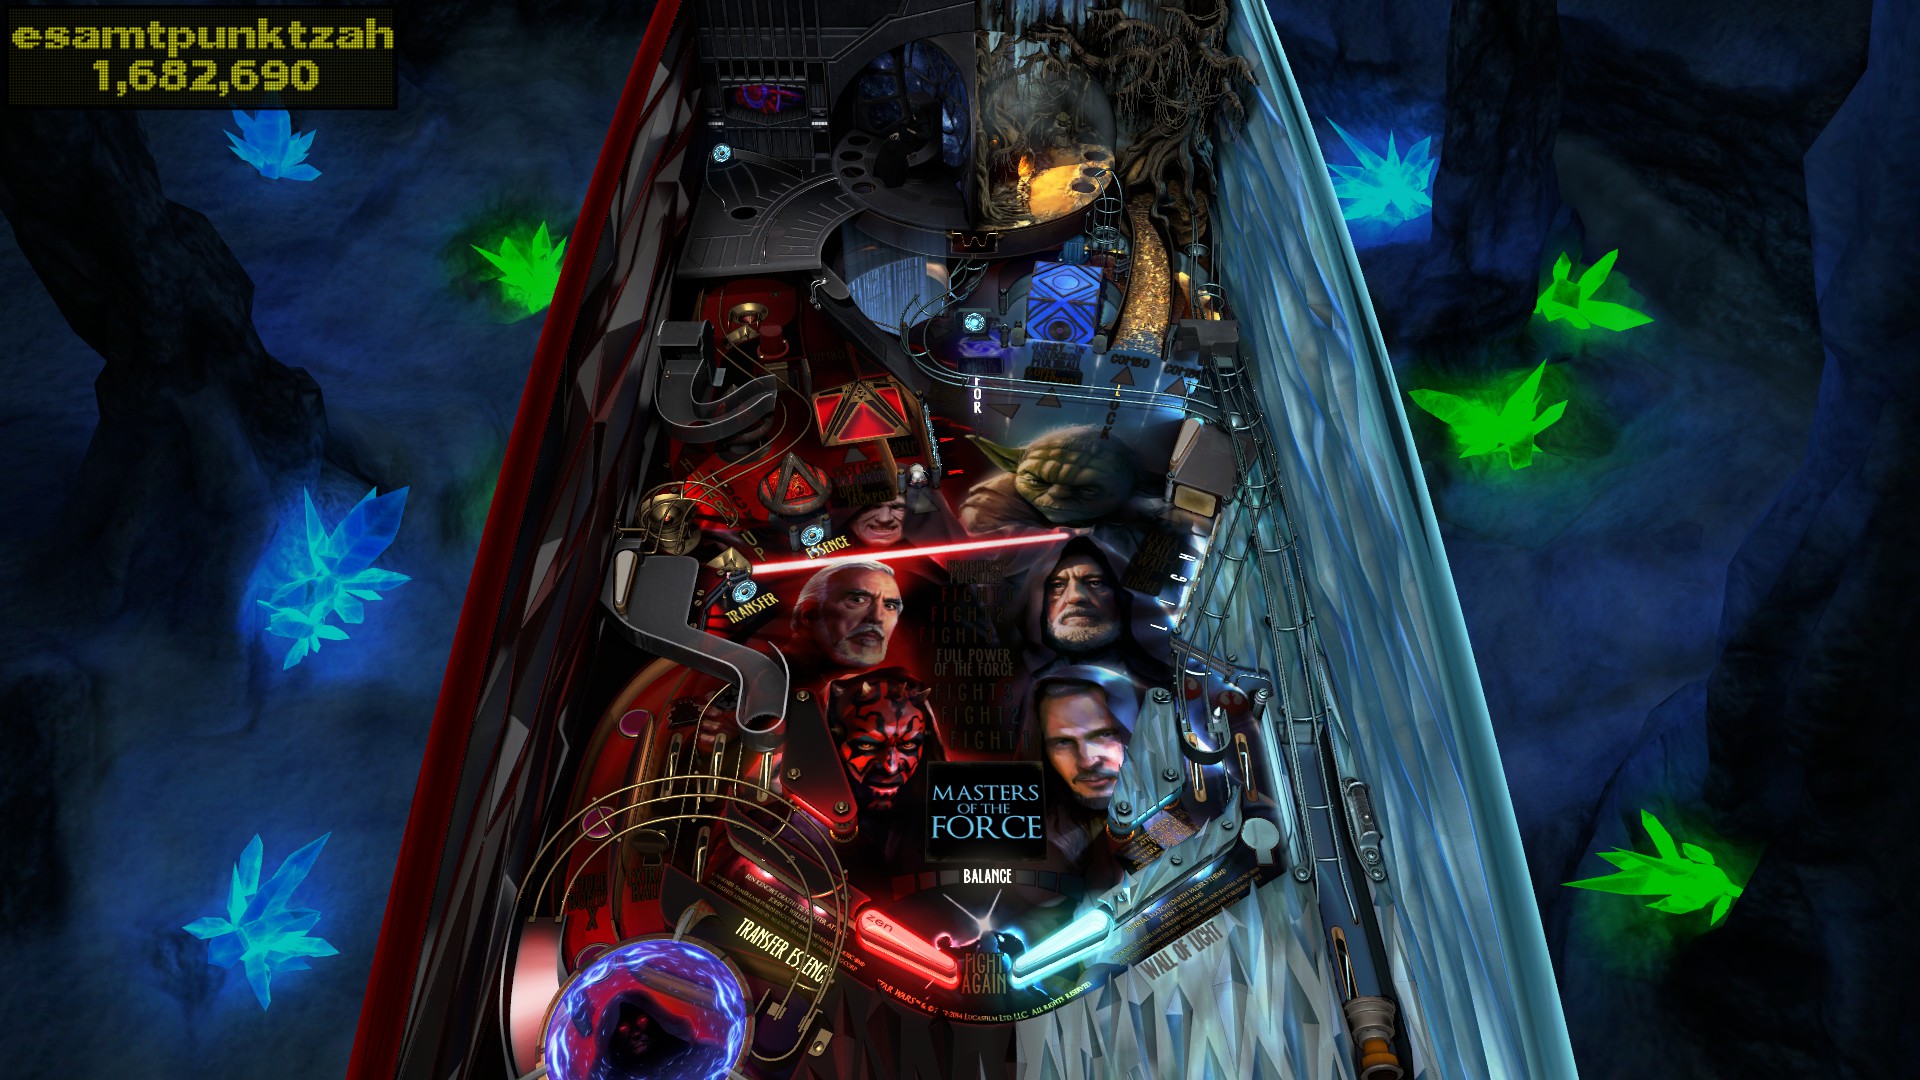 e2e4: Pinball FX3: Star Wars Pinball: Masters of the Force [Classic] (PC) 1,682,690 points on 2022-05-19 08:17:45